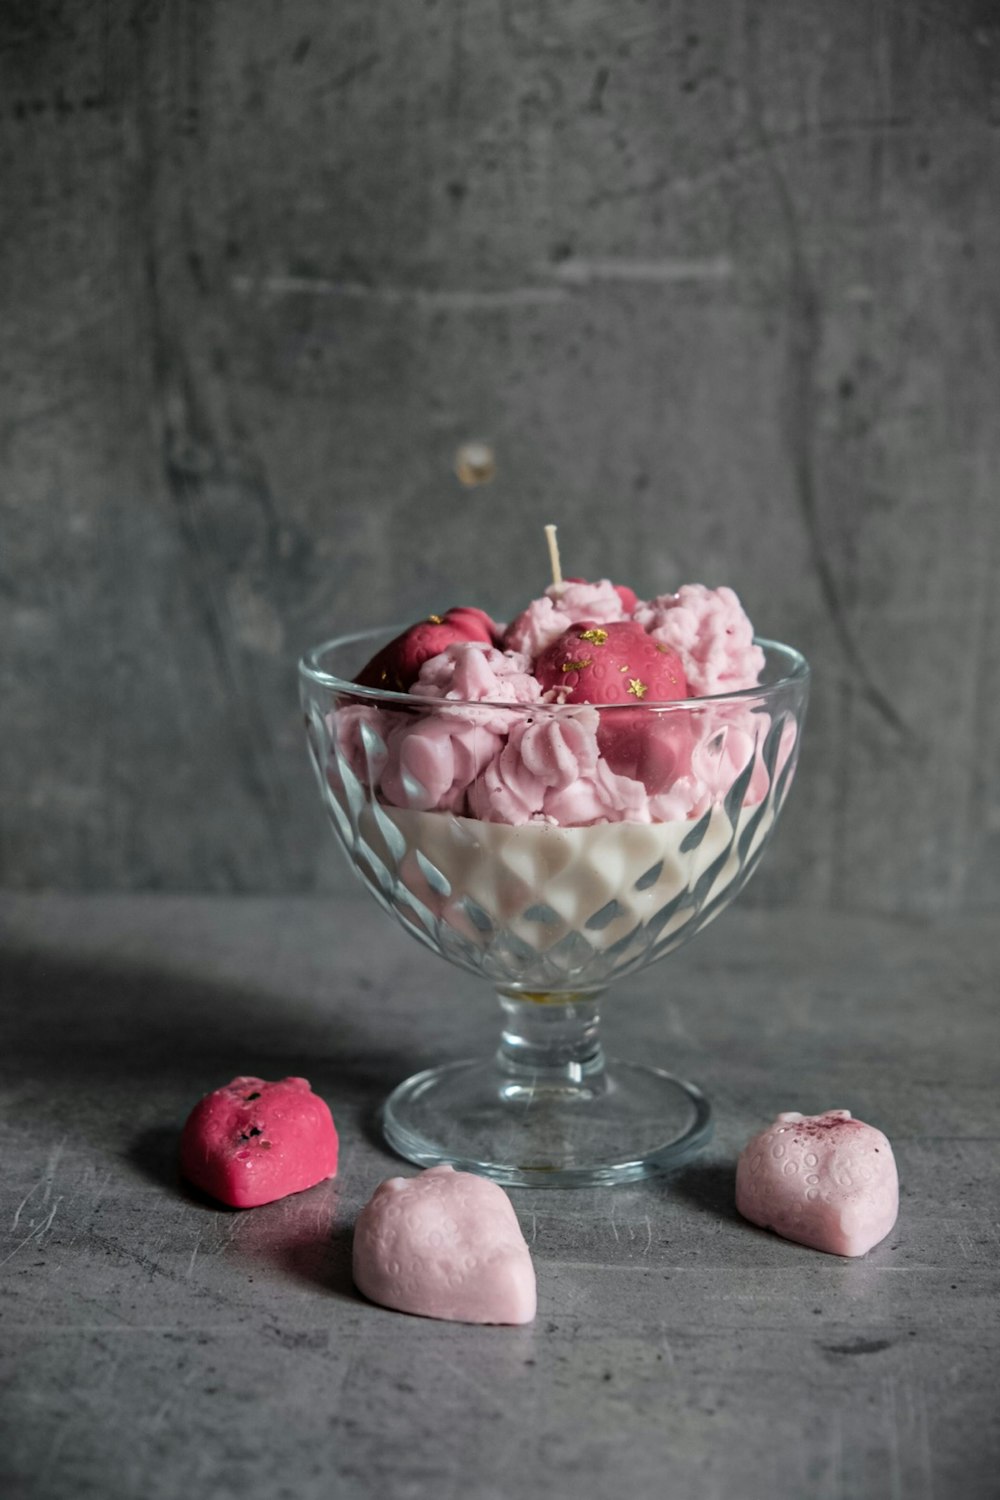 a glass bowl filled with pink and white dessert